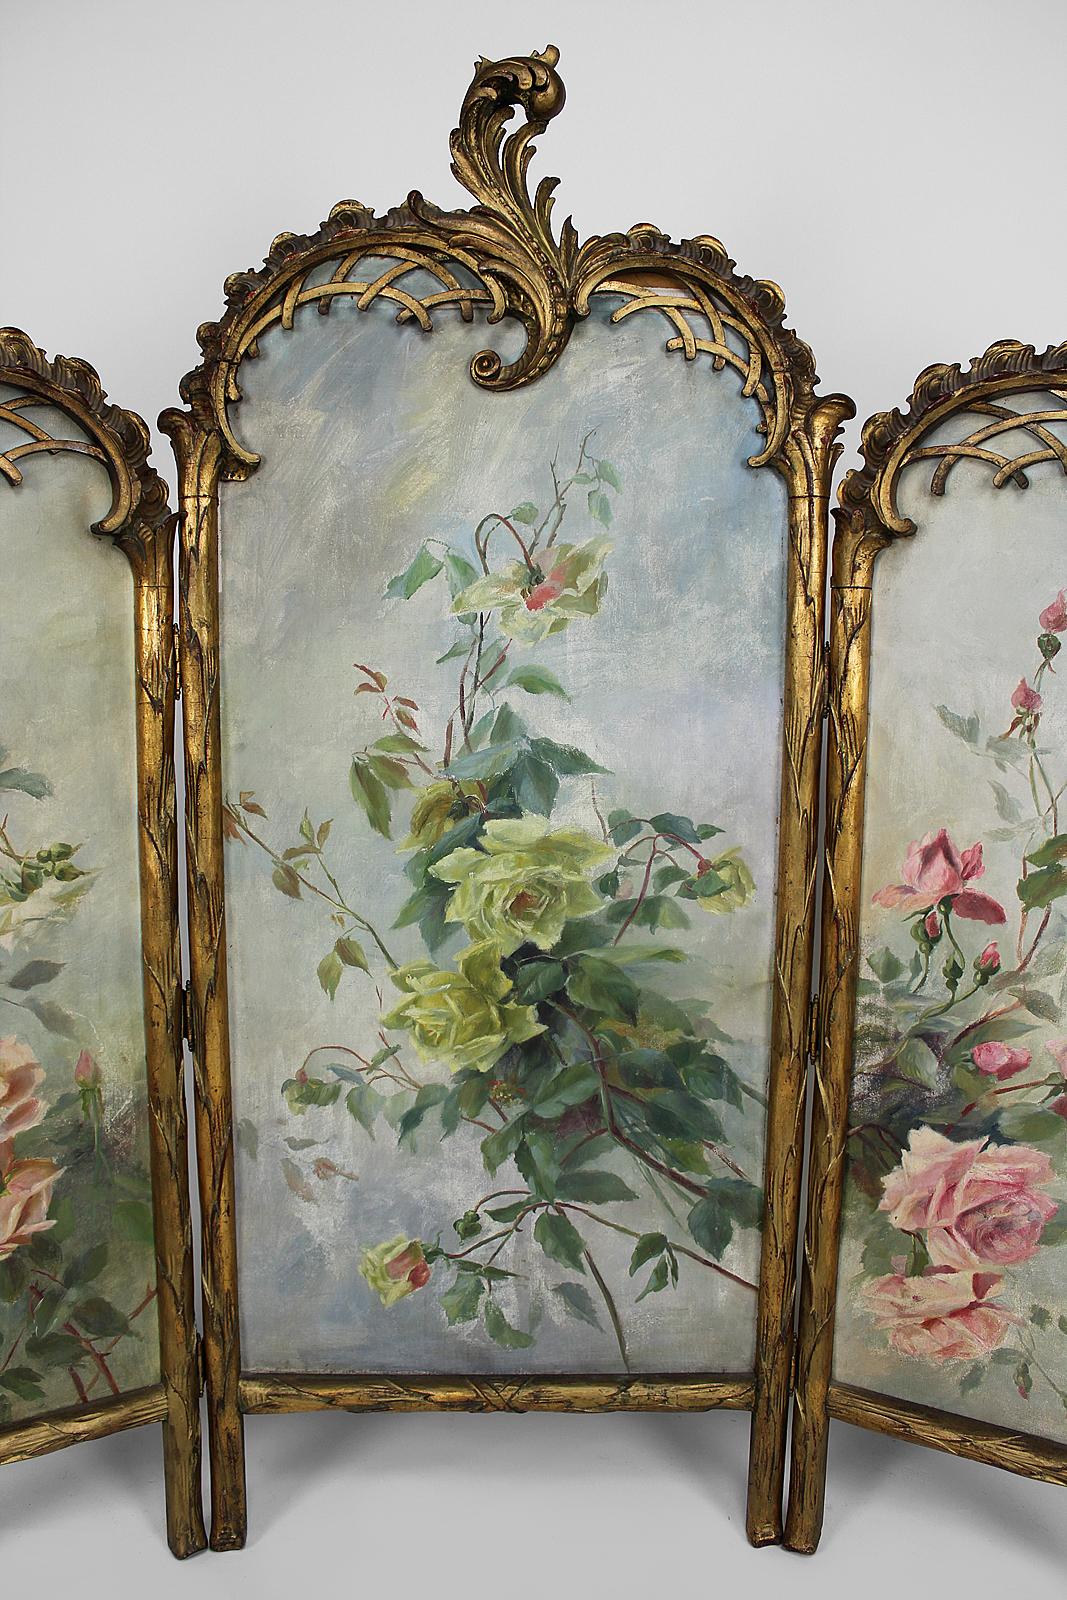 French Belle Epoque Folding Screen, Gilded Carved Wood and Naturalist Paintings, 1880s